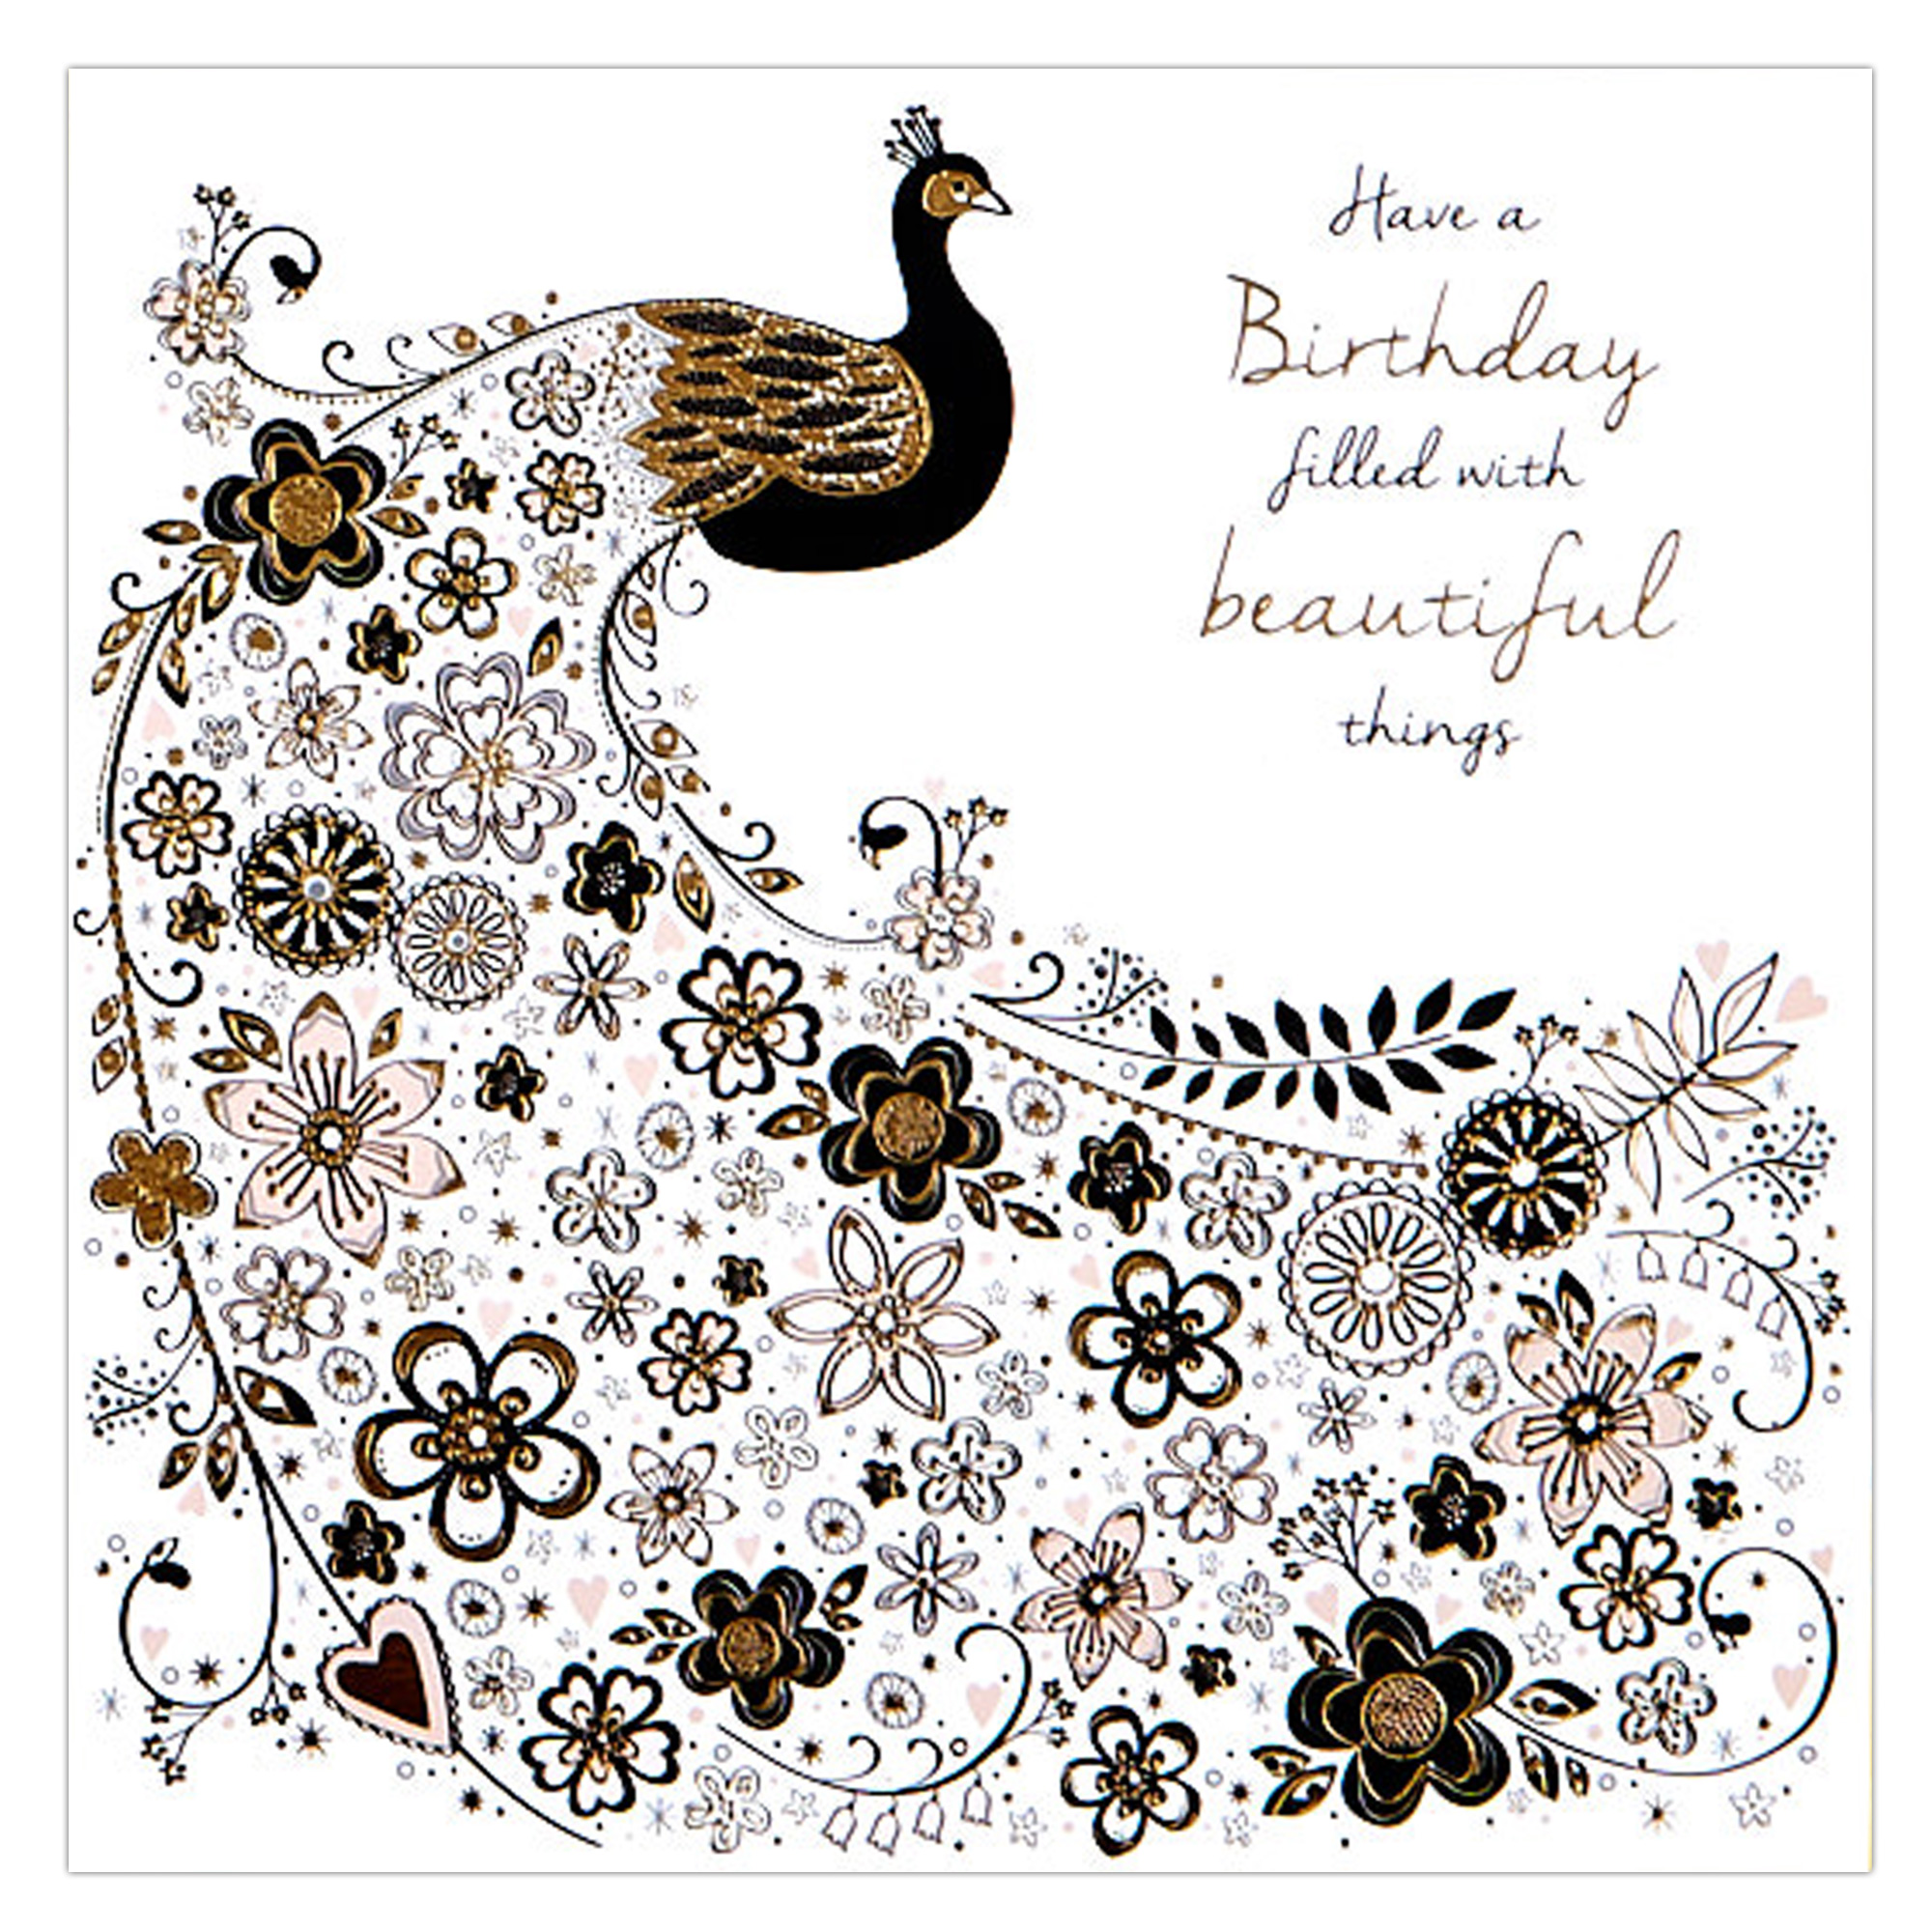 12 Birthday Cards - Filled With Beautiful Things 